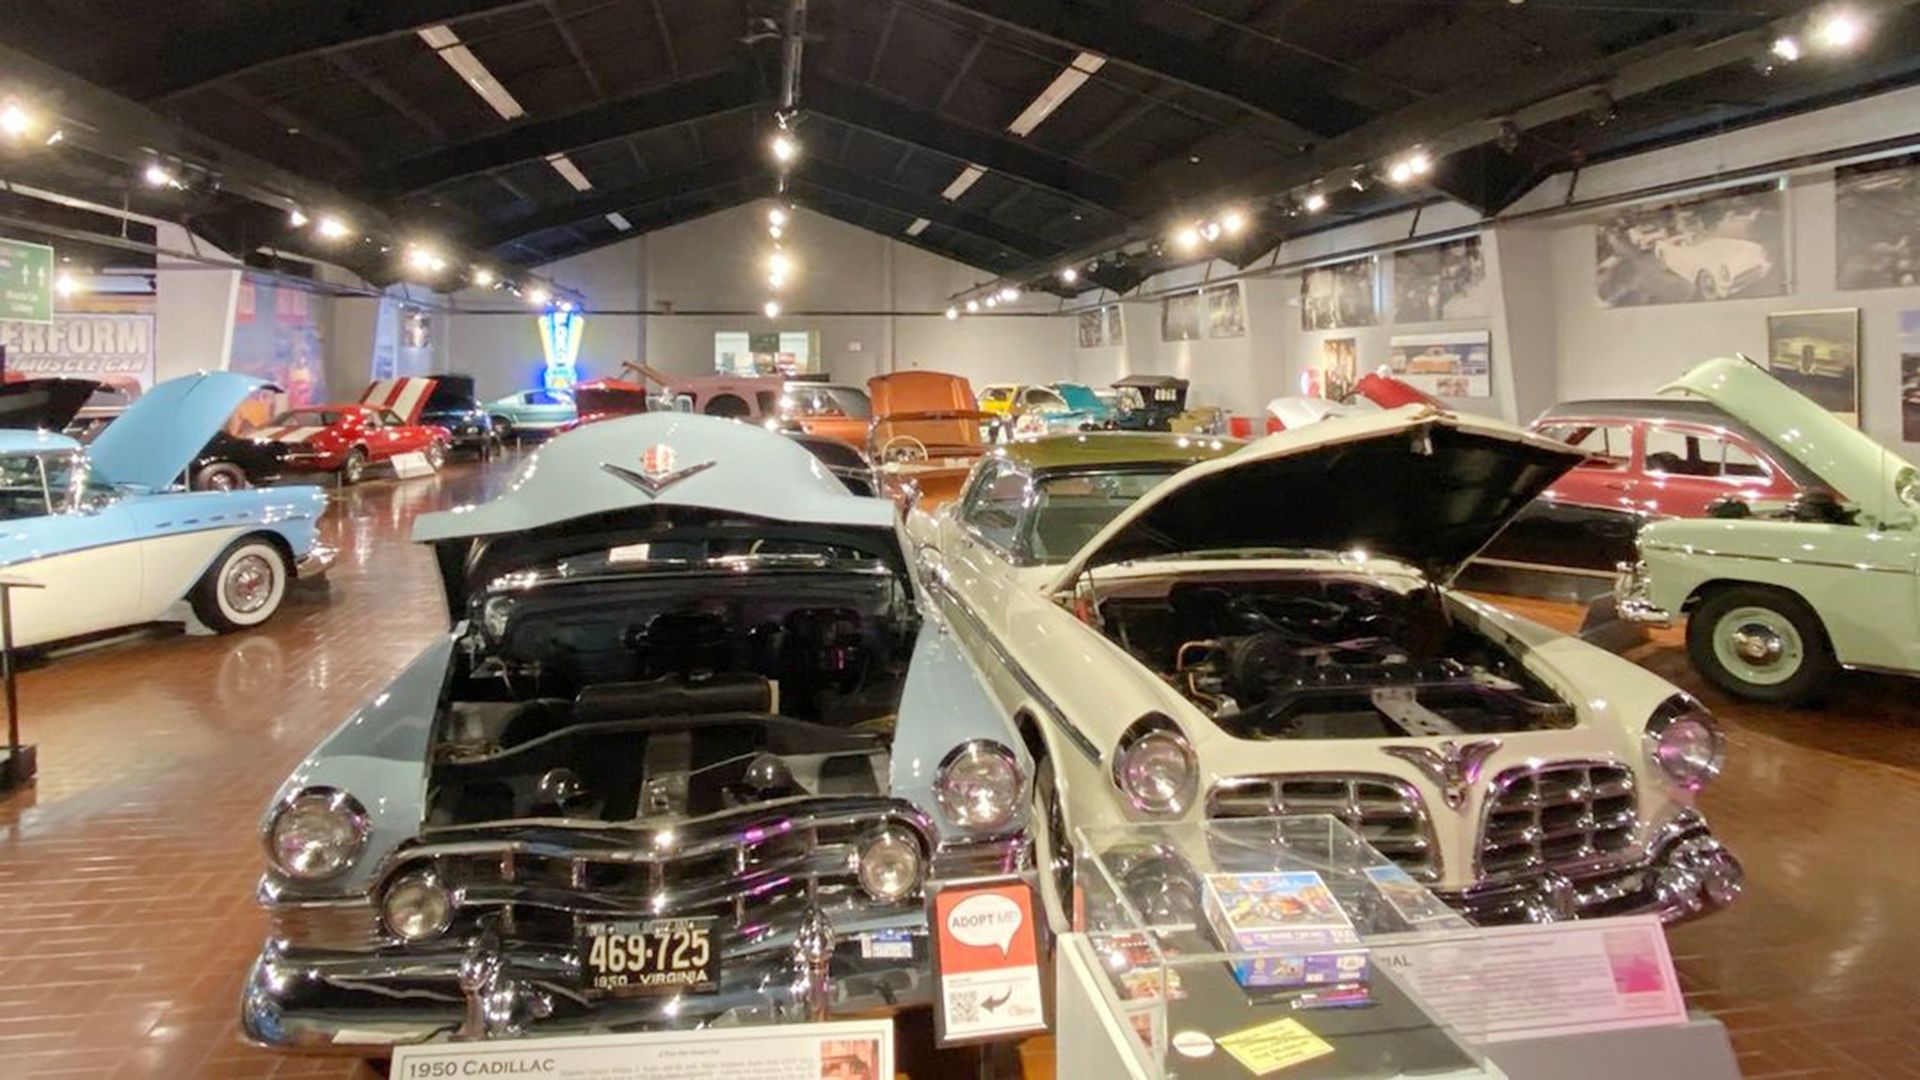 How Gilmore Car Museum Became One Of The Largest Car Museums In The U.S.